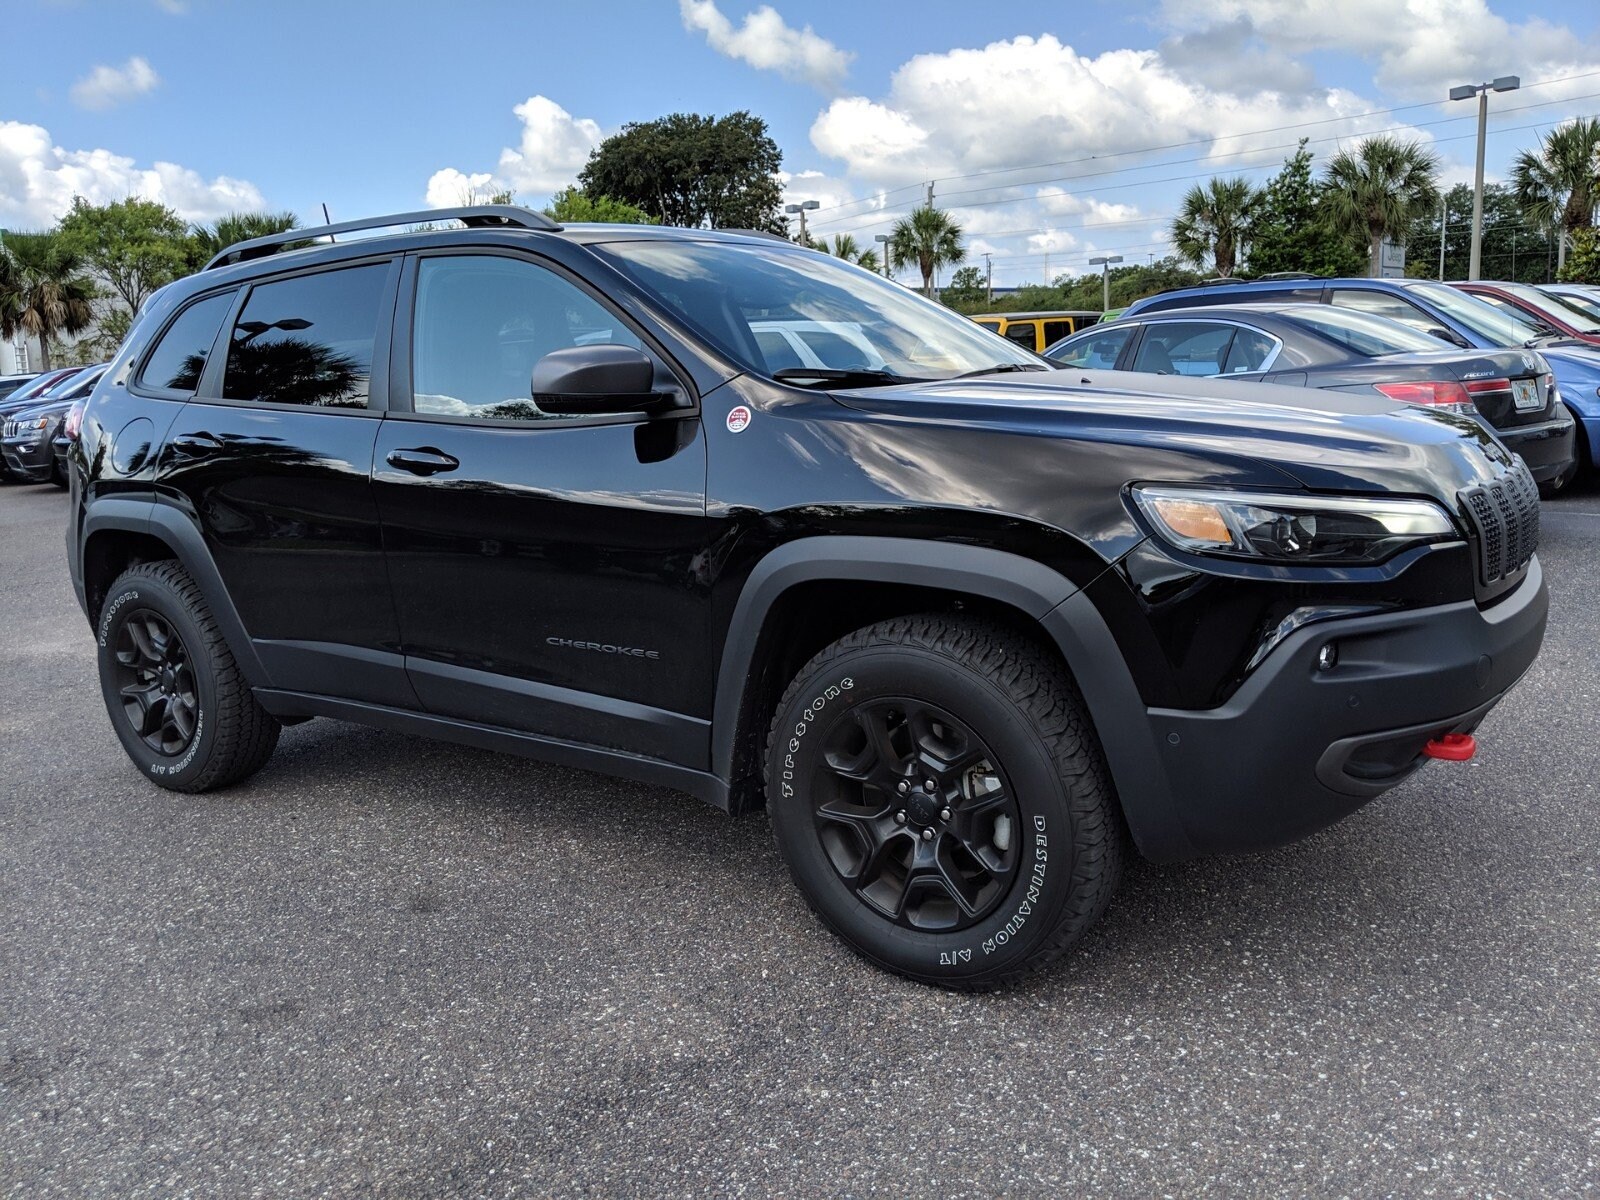 Jeep Cherokee Trailhawk Elite For Sale In St